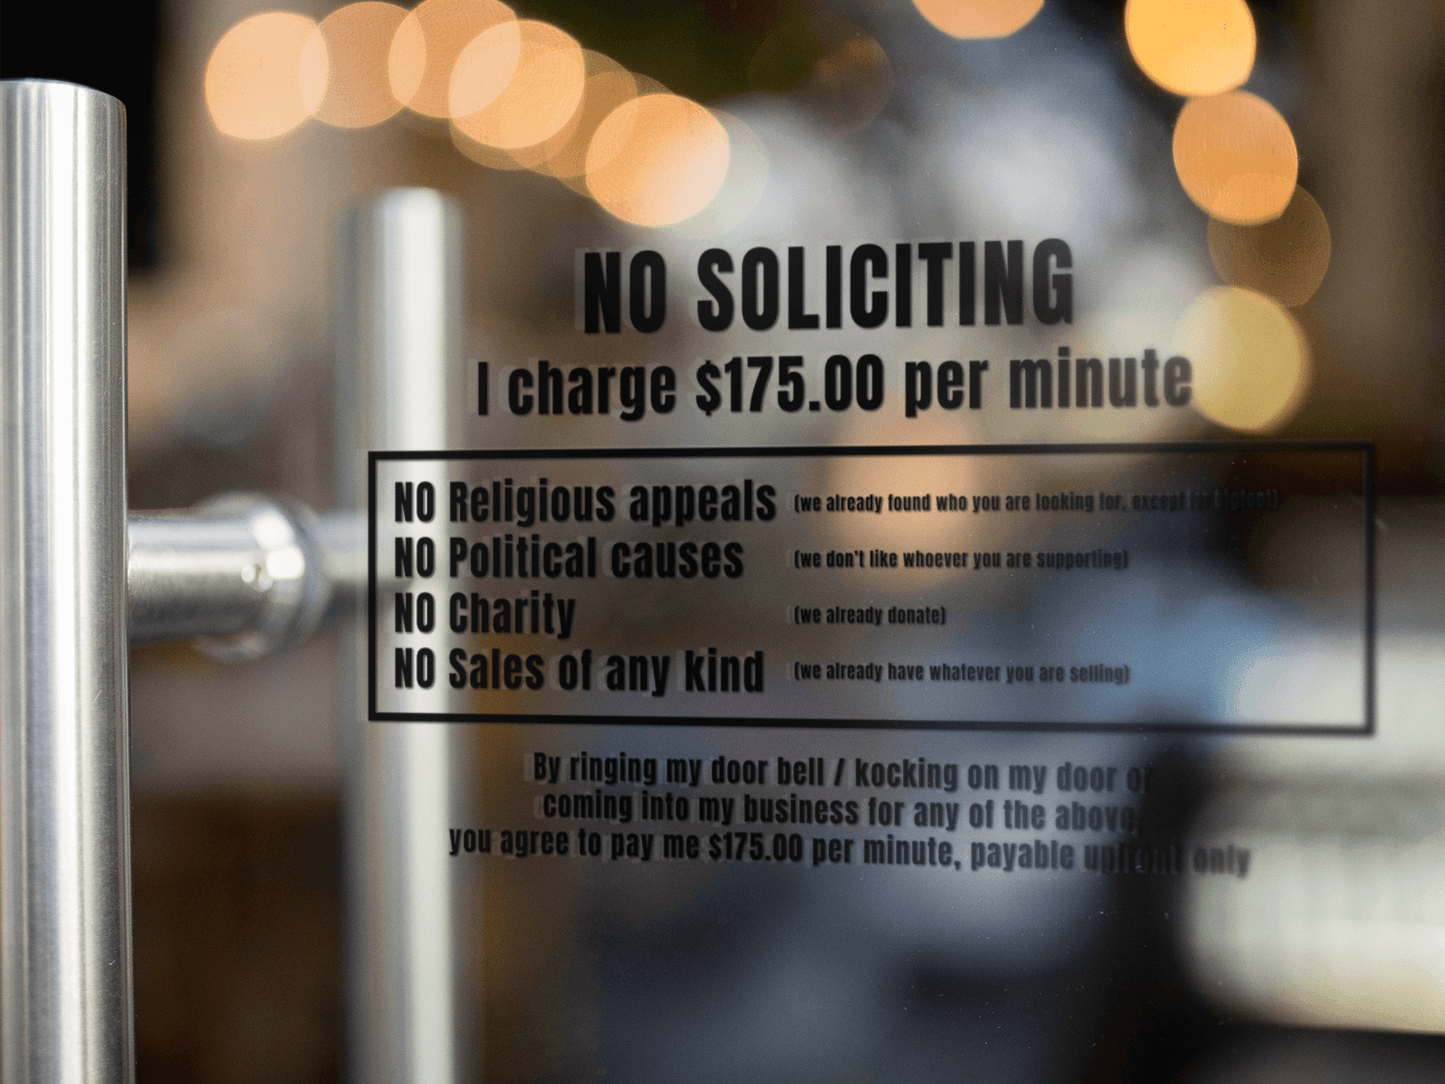 No Soliciting, charity, religious appeals, no political causes, no sales of any kind - Vinyl Sticker for door / window